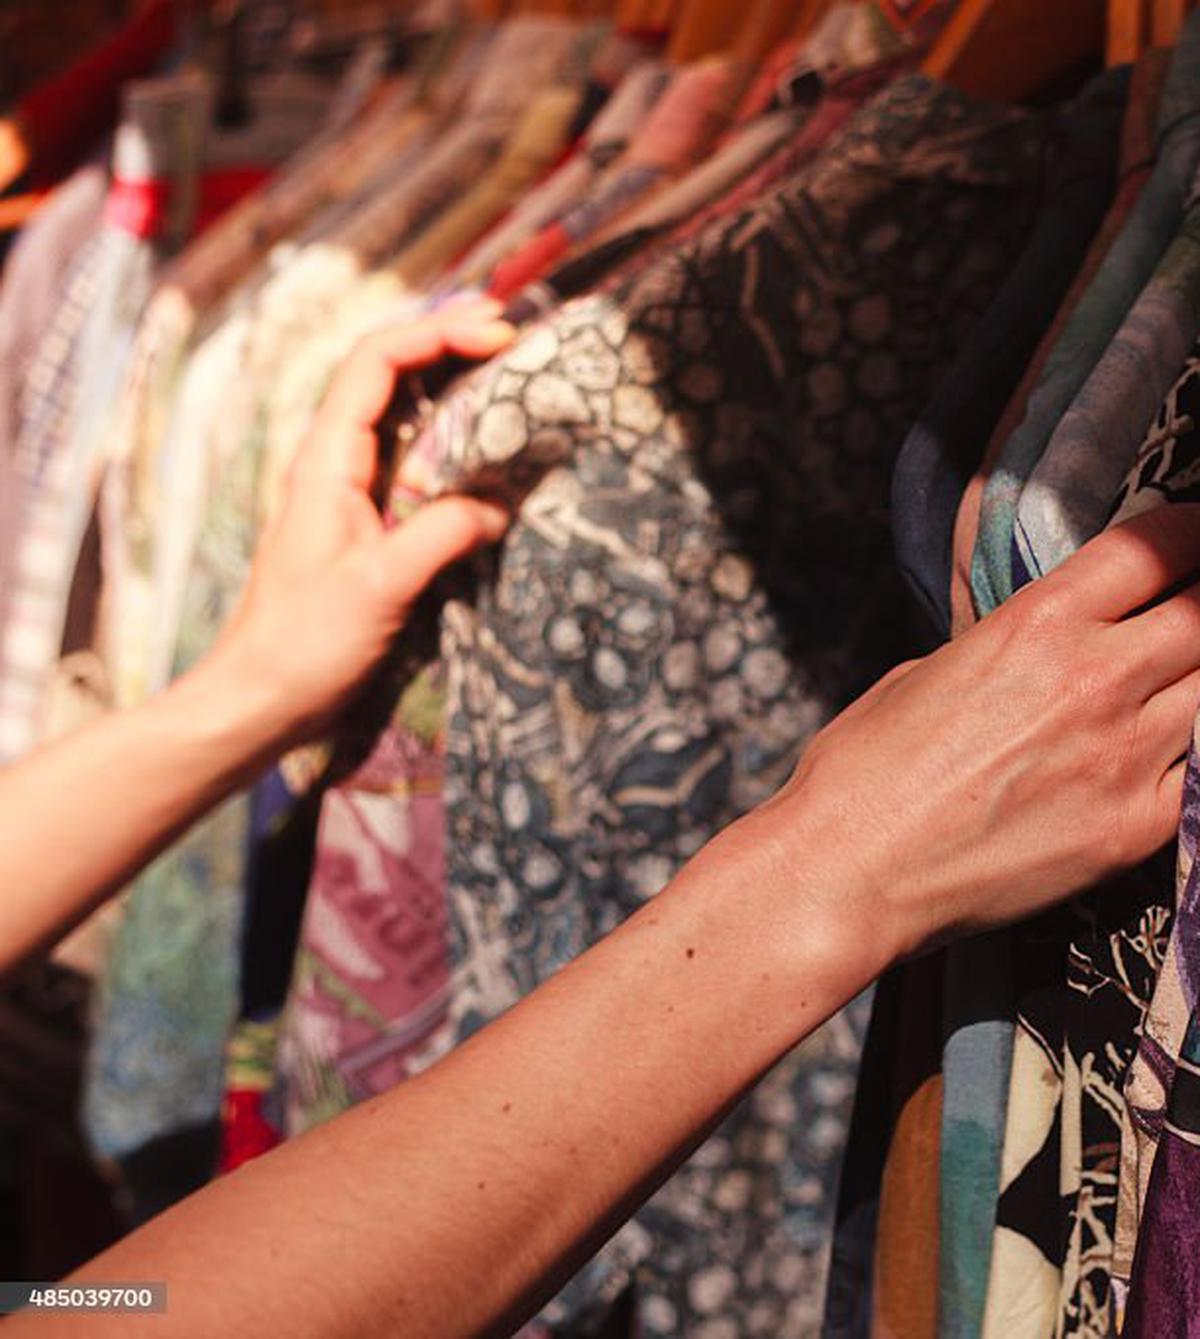 A young woman is browsing a rail of clothes at a street market